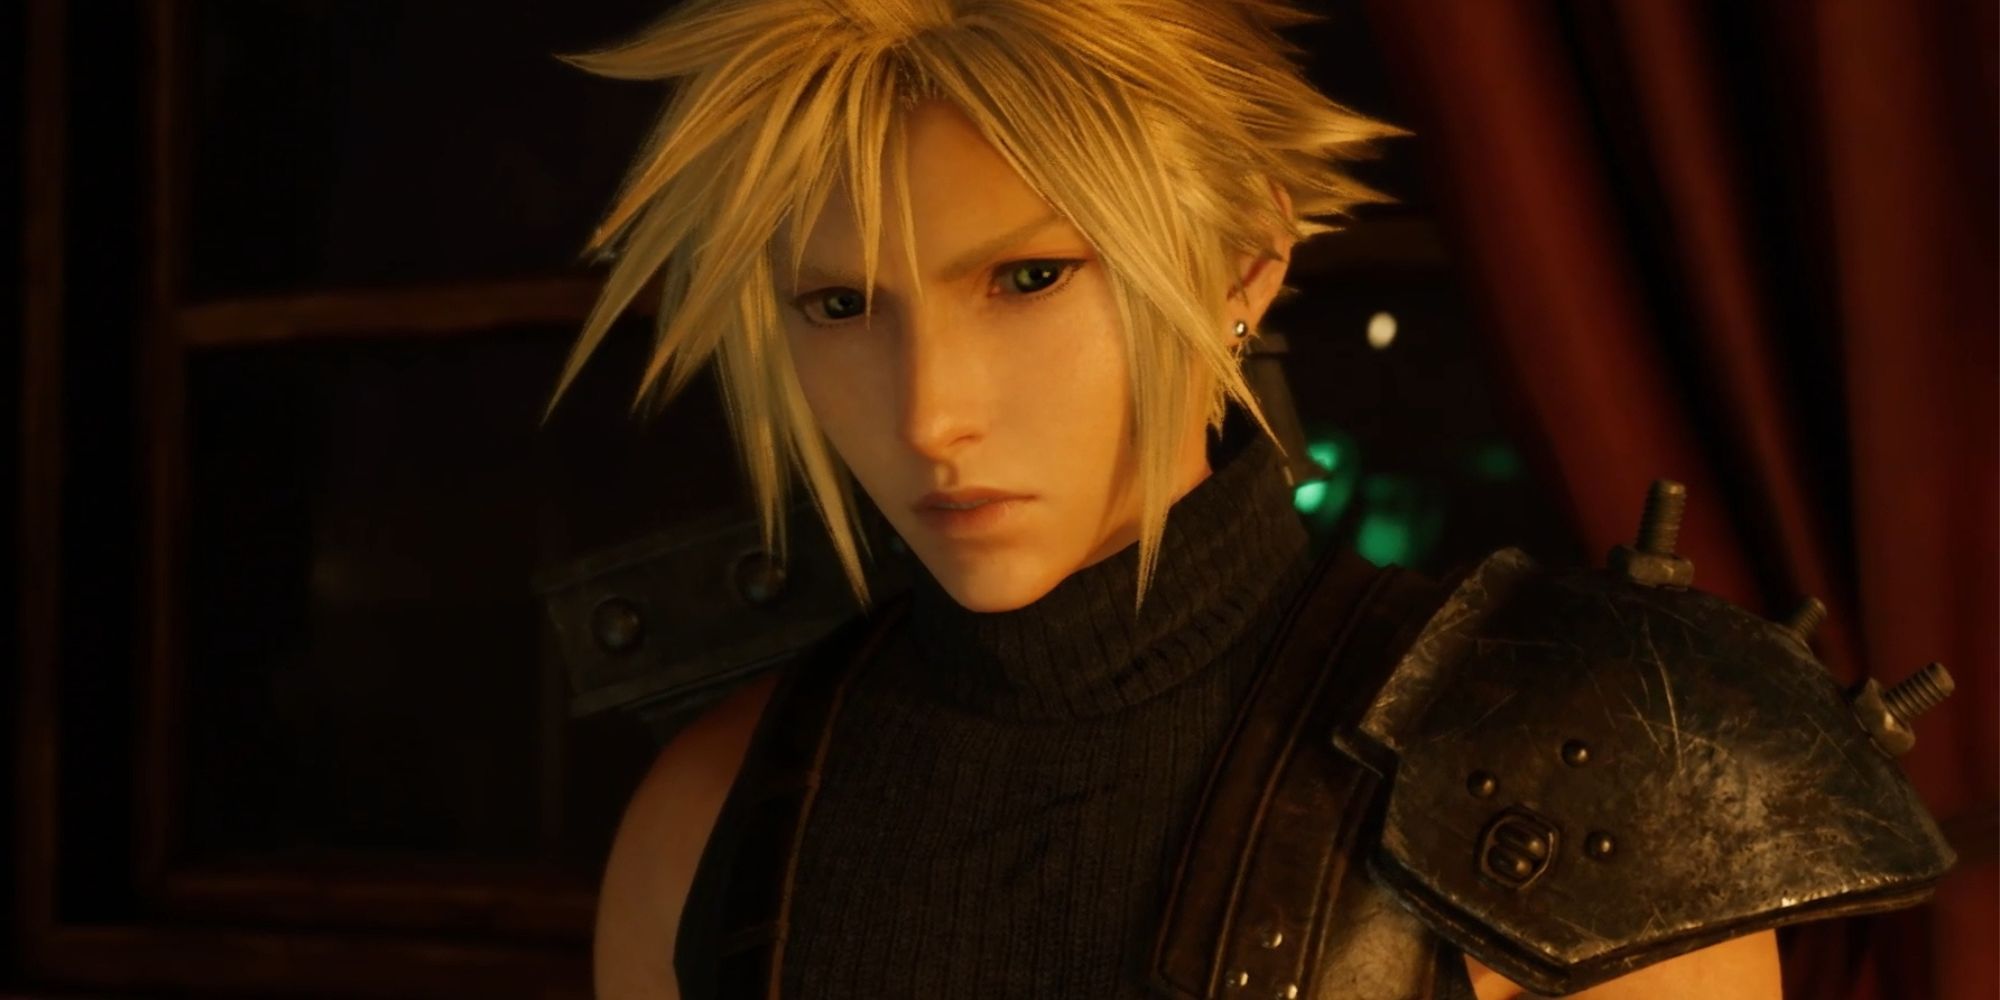 Final Fantasy 7, Spider-Man 2, and every other game featured at Summer Game Fest